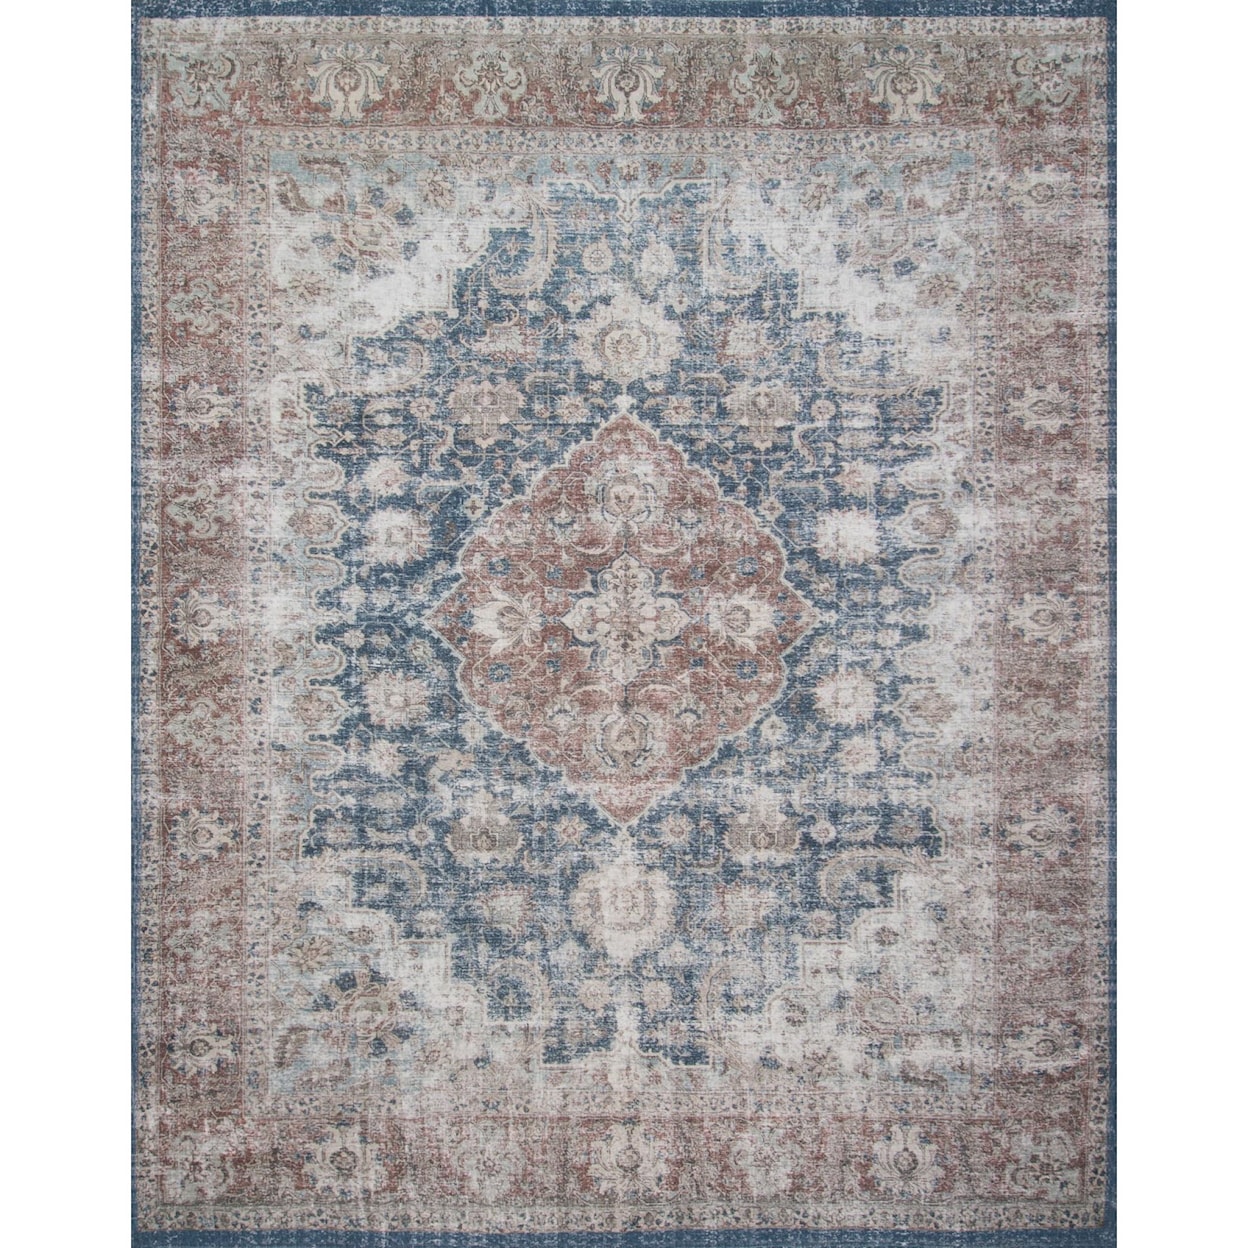 Magnolia Home by Joanna Gaines for Loloi Lucca 3'-9" x 5'-6" Rug